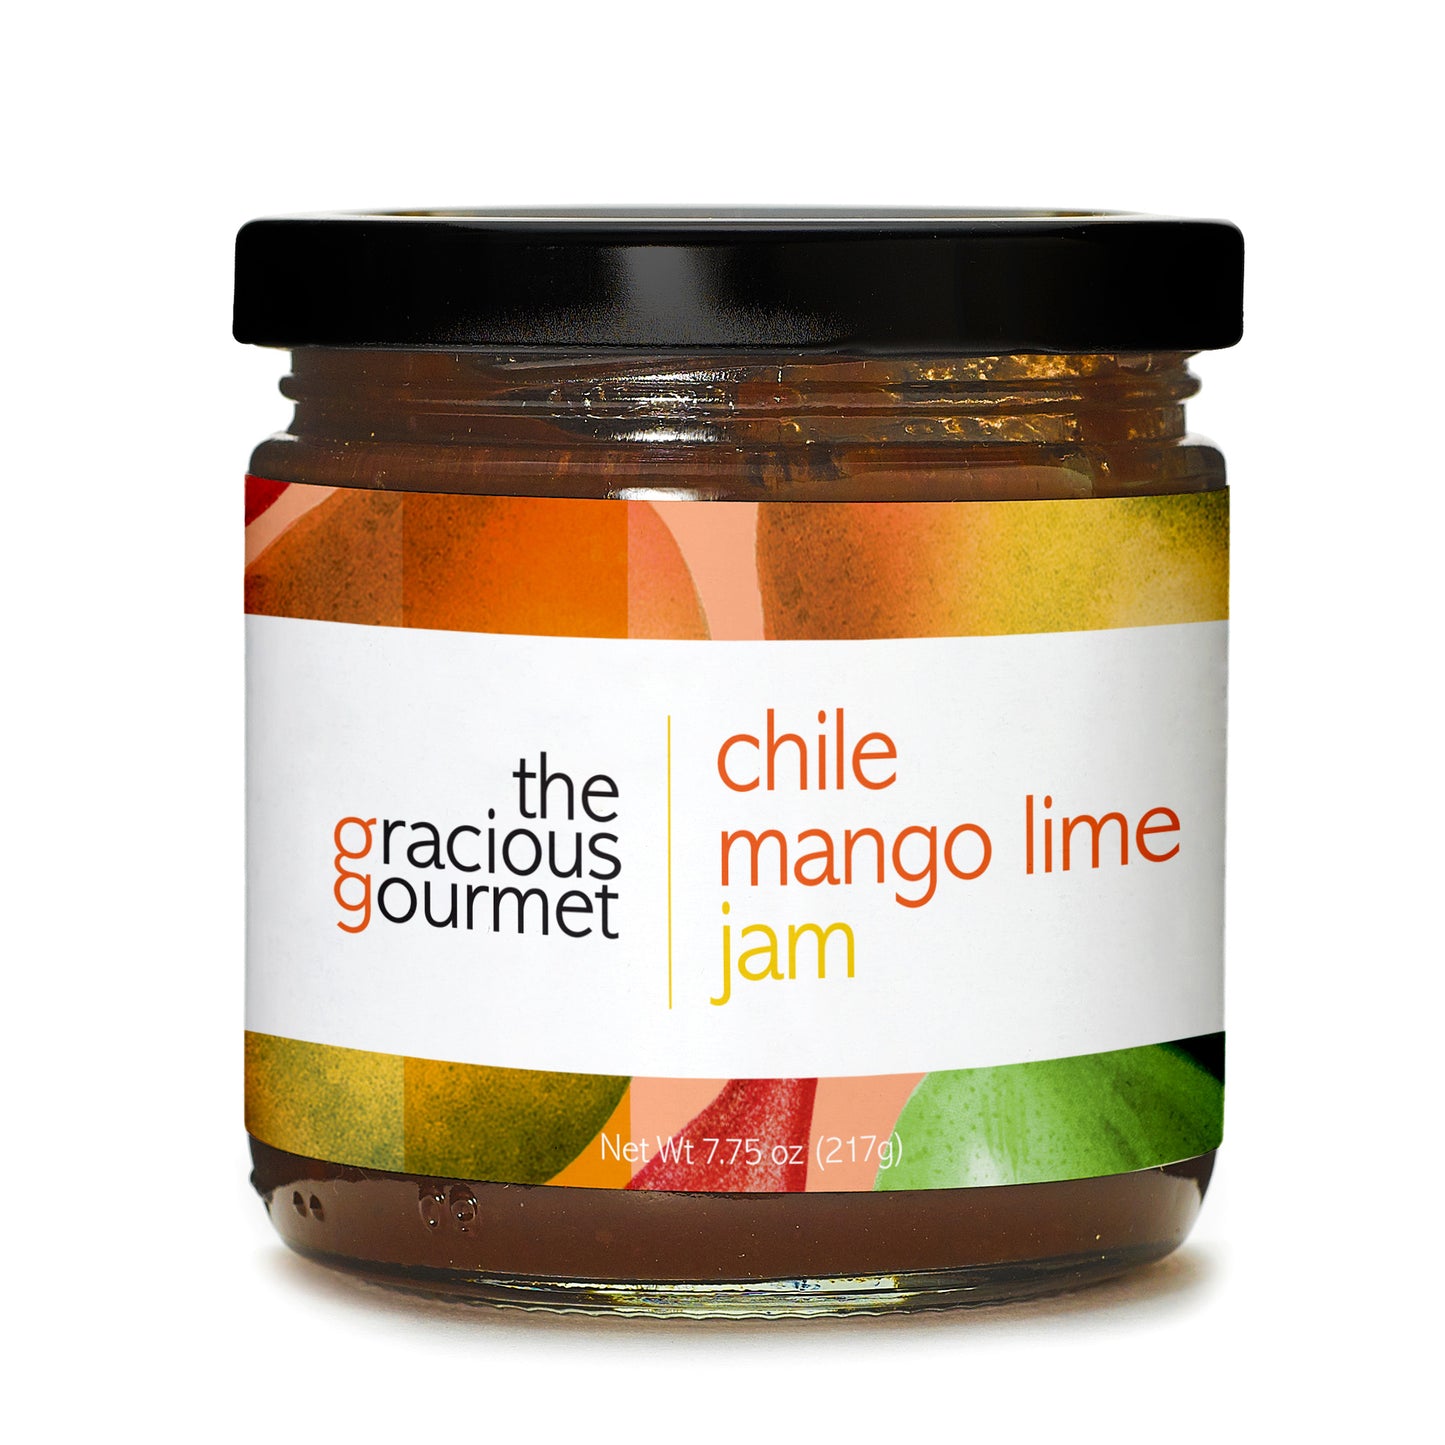 Chile Mango Lime Jam (2 pack) - from The Gracious Gourmet 